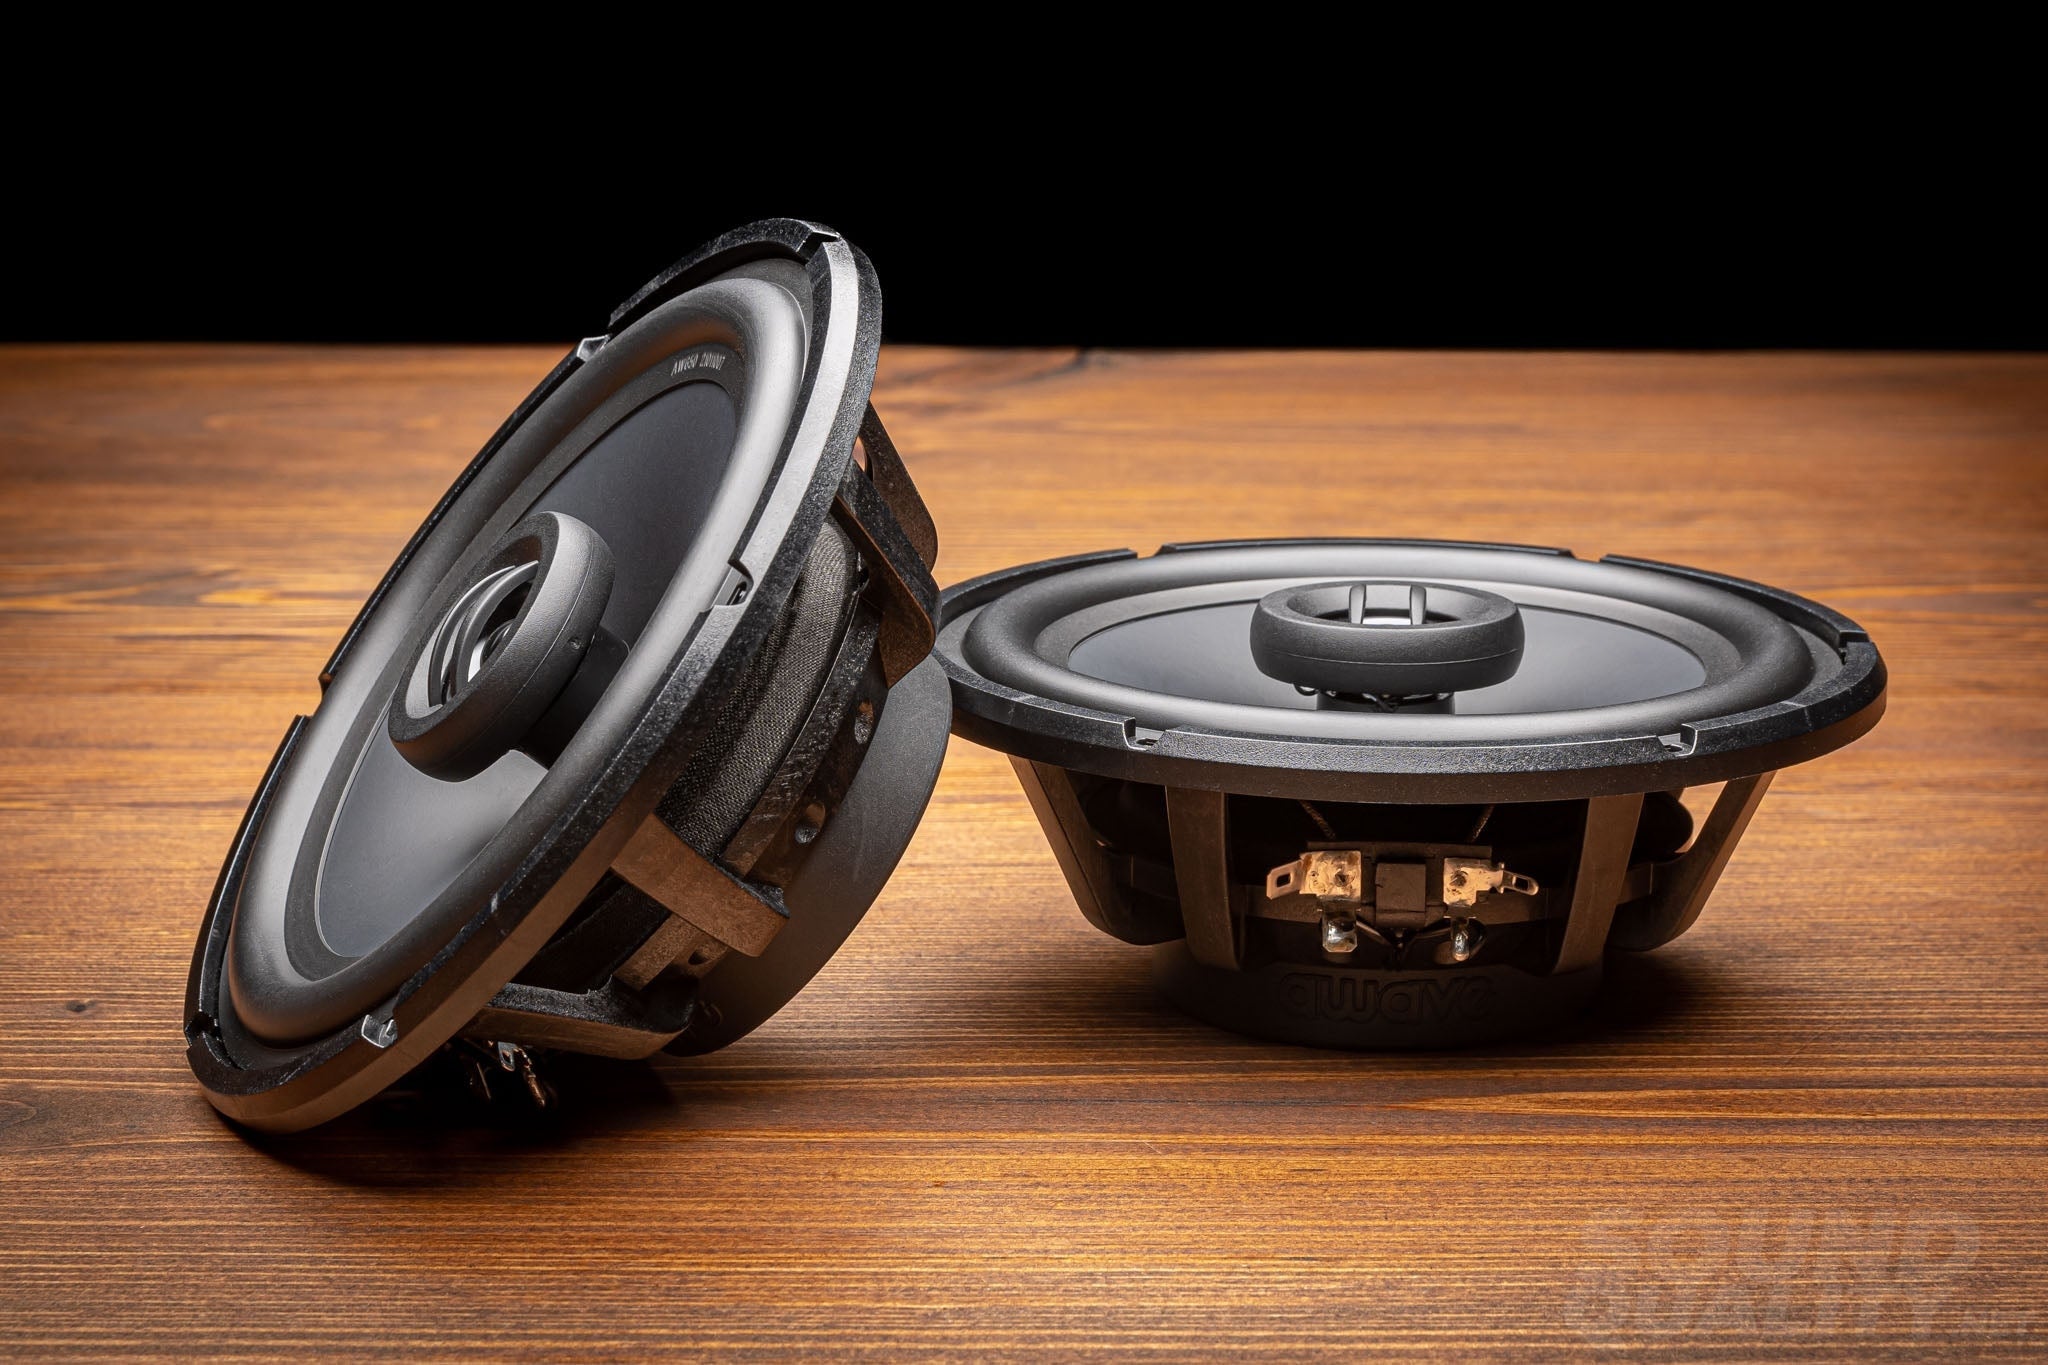 Awave Aw650 6.5 Coaxial Speakers